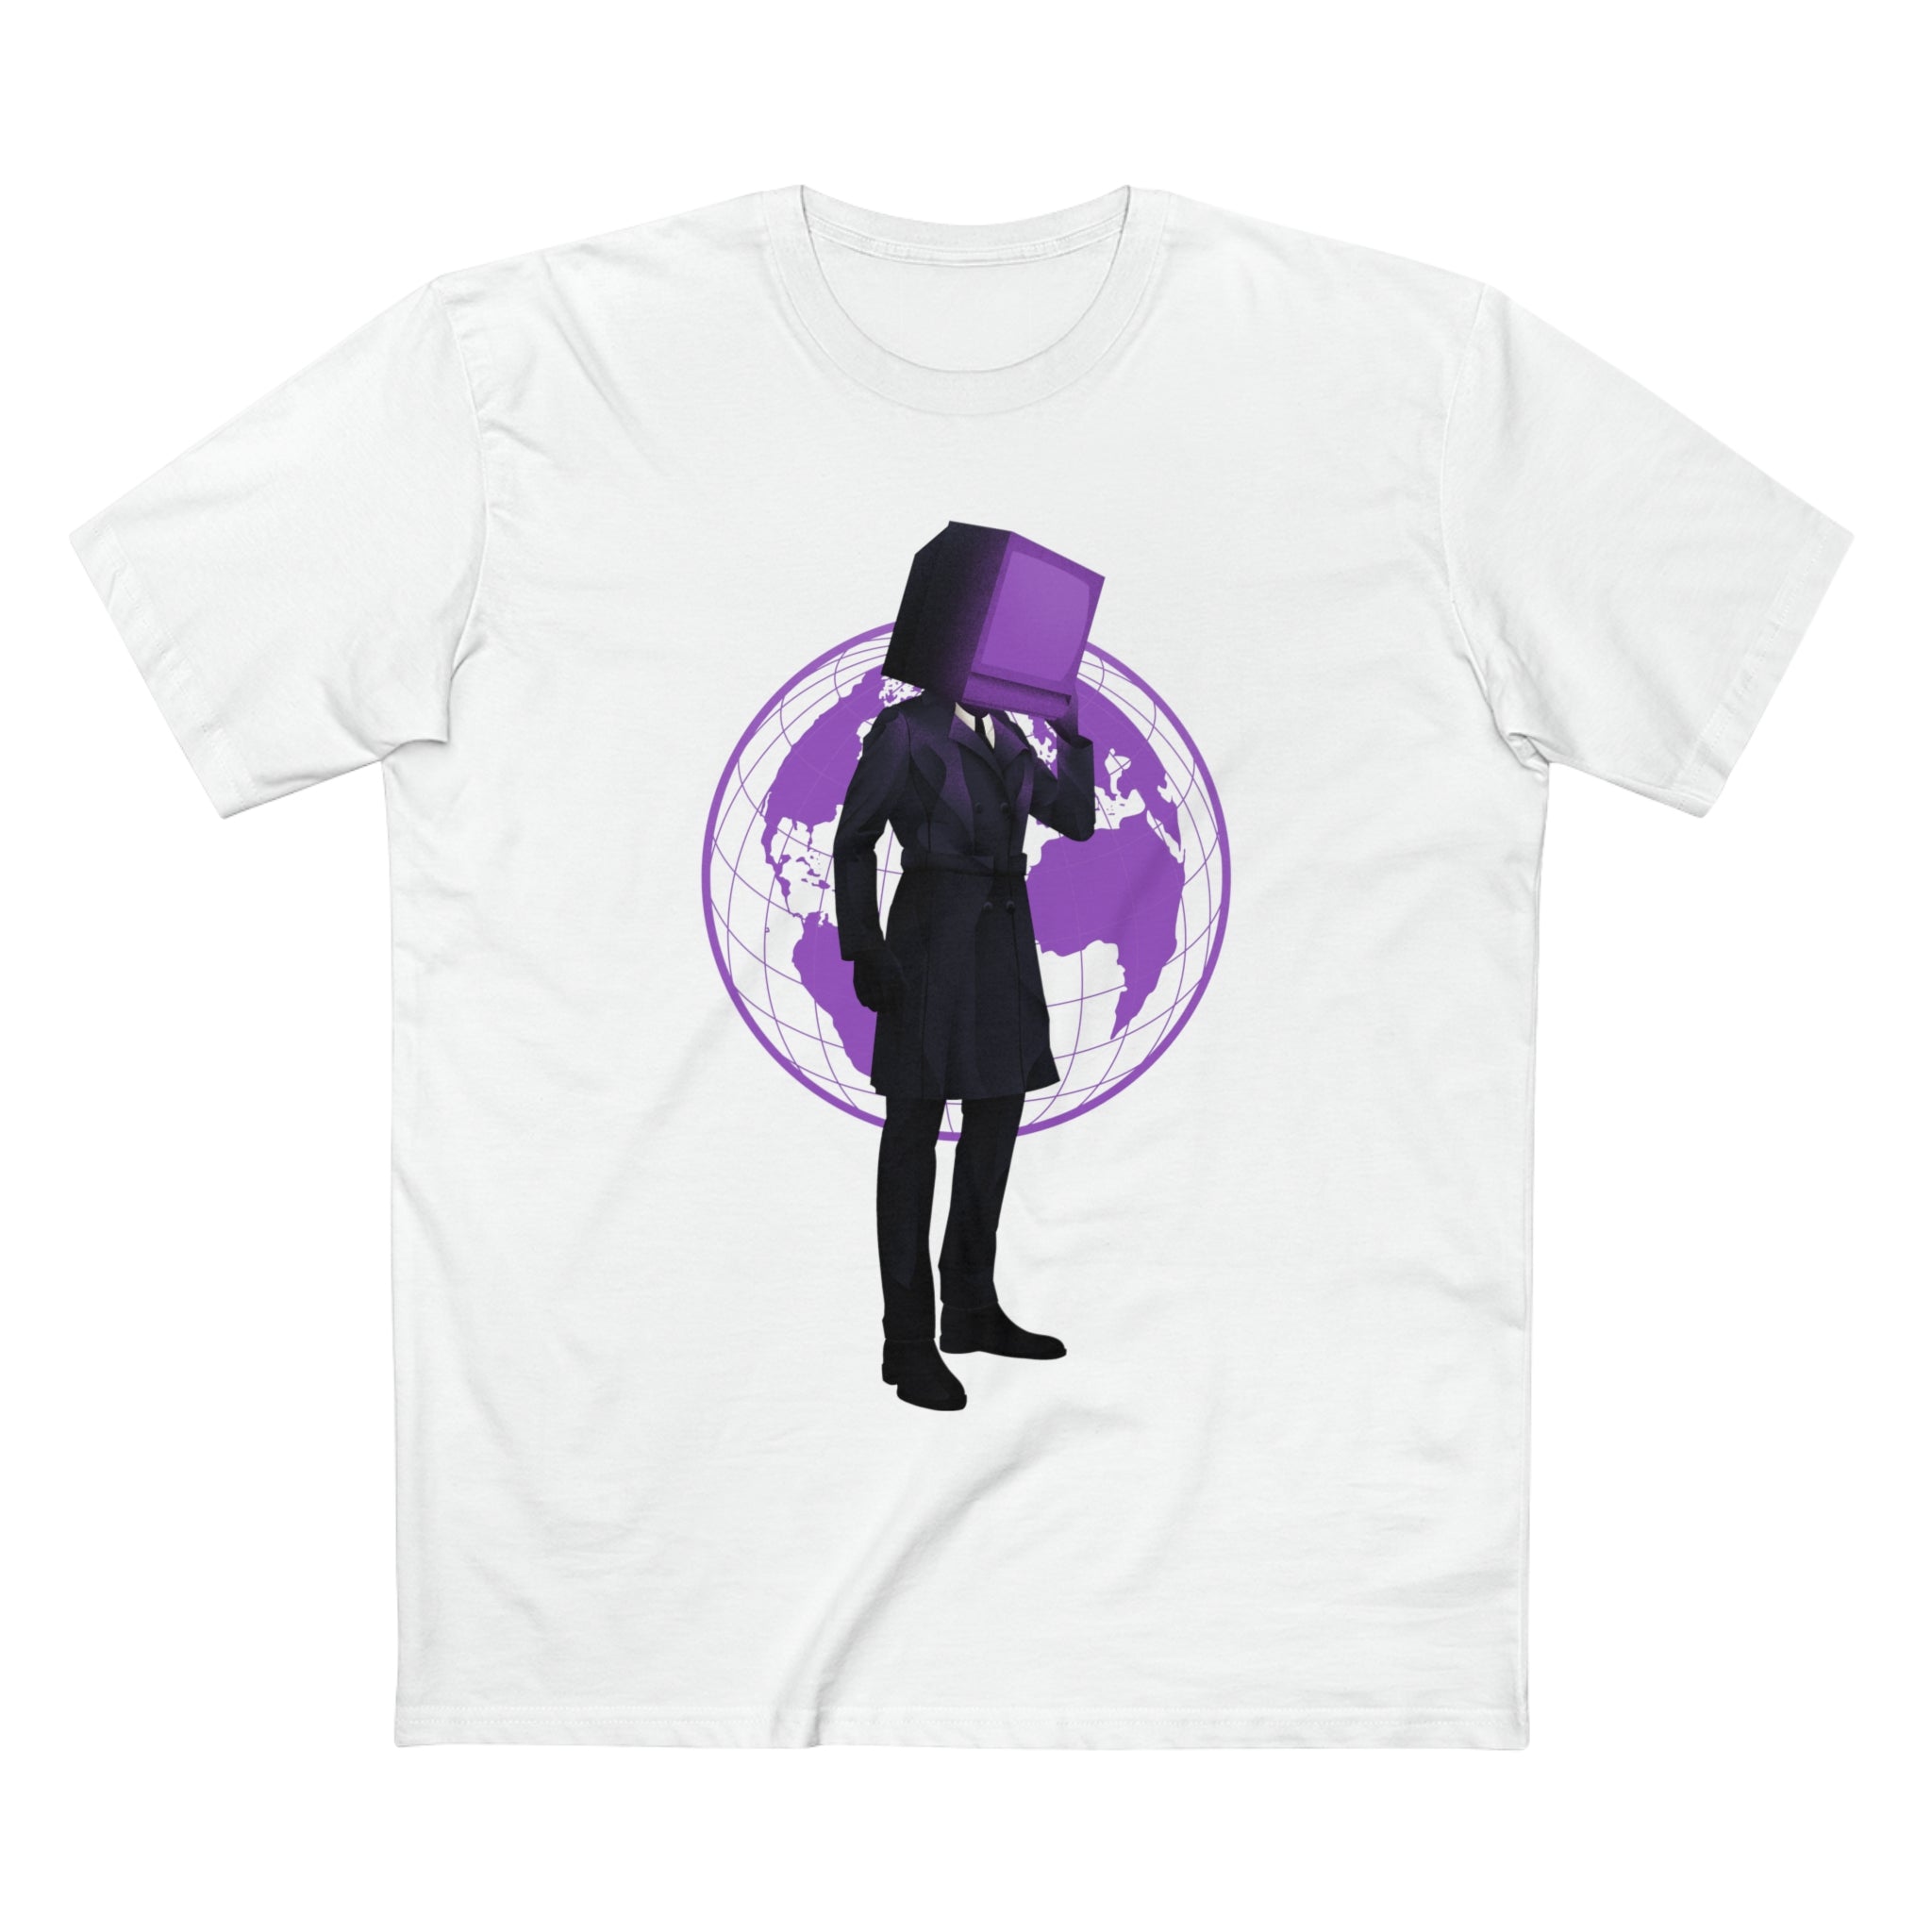 white tee featuring TV Man with a purple-glow world, white tee